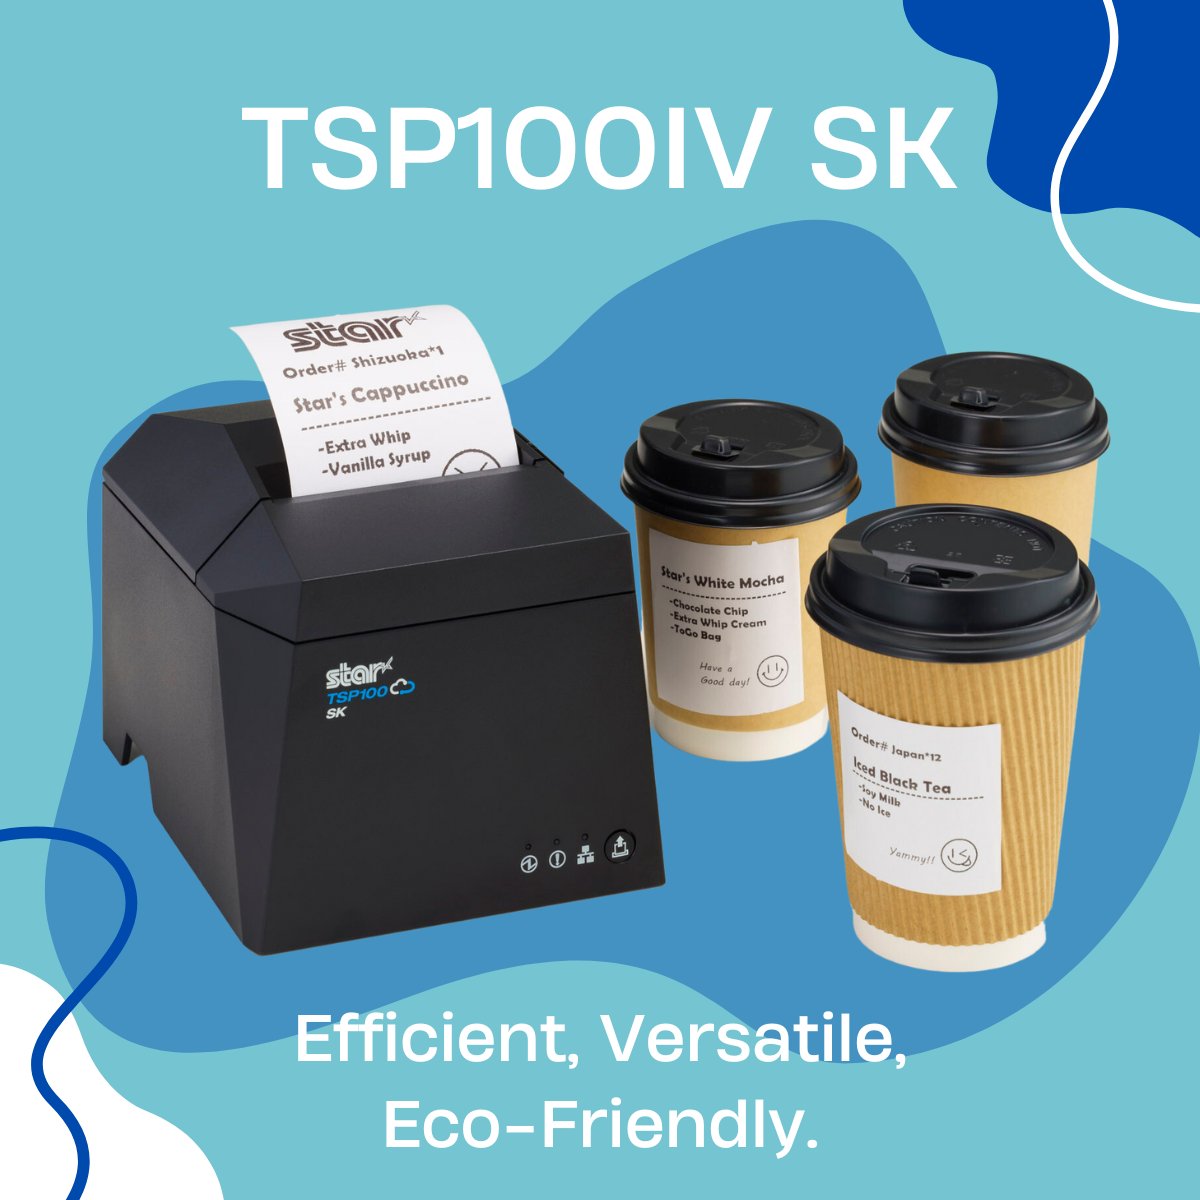 Have you heard about the brand NEW TSP100IVSK? It's your cutting-edge solution for sticky printing! The TSP100IVSK is the next generation sticky label printer. Featuring superior re-stick capabilities, this innovative printer is set to enhance your business labelling.